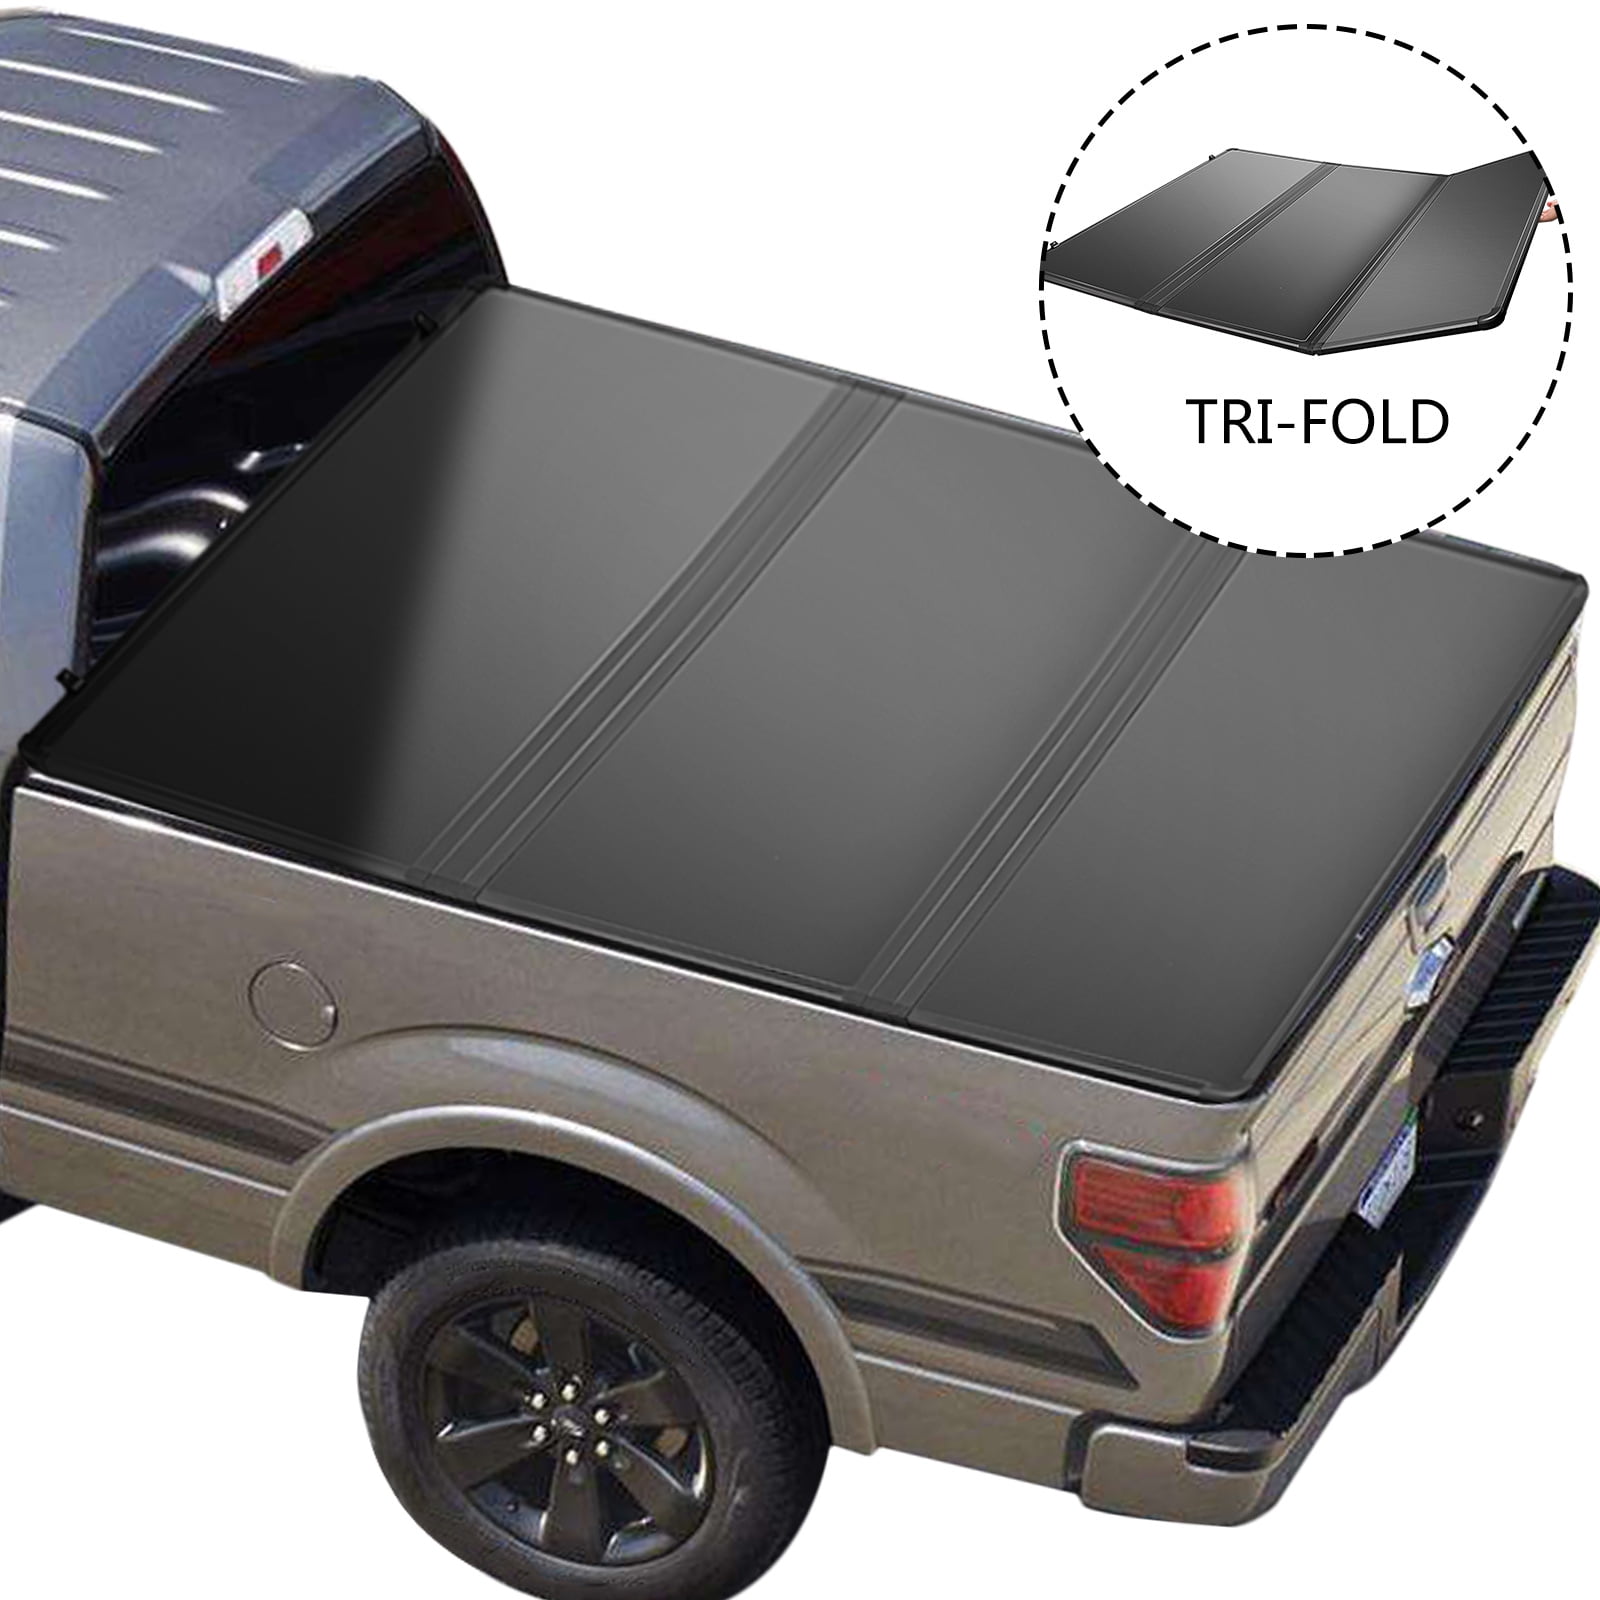 oEdRo Quad Fold Tonneau Cover Soft Four Fold Truck Bed Covers Compatible for 2009-2014 Ford F-150 F150 5.5 Bed Styleside 